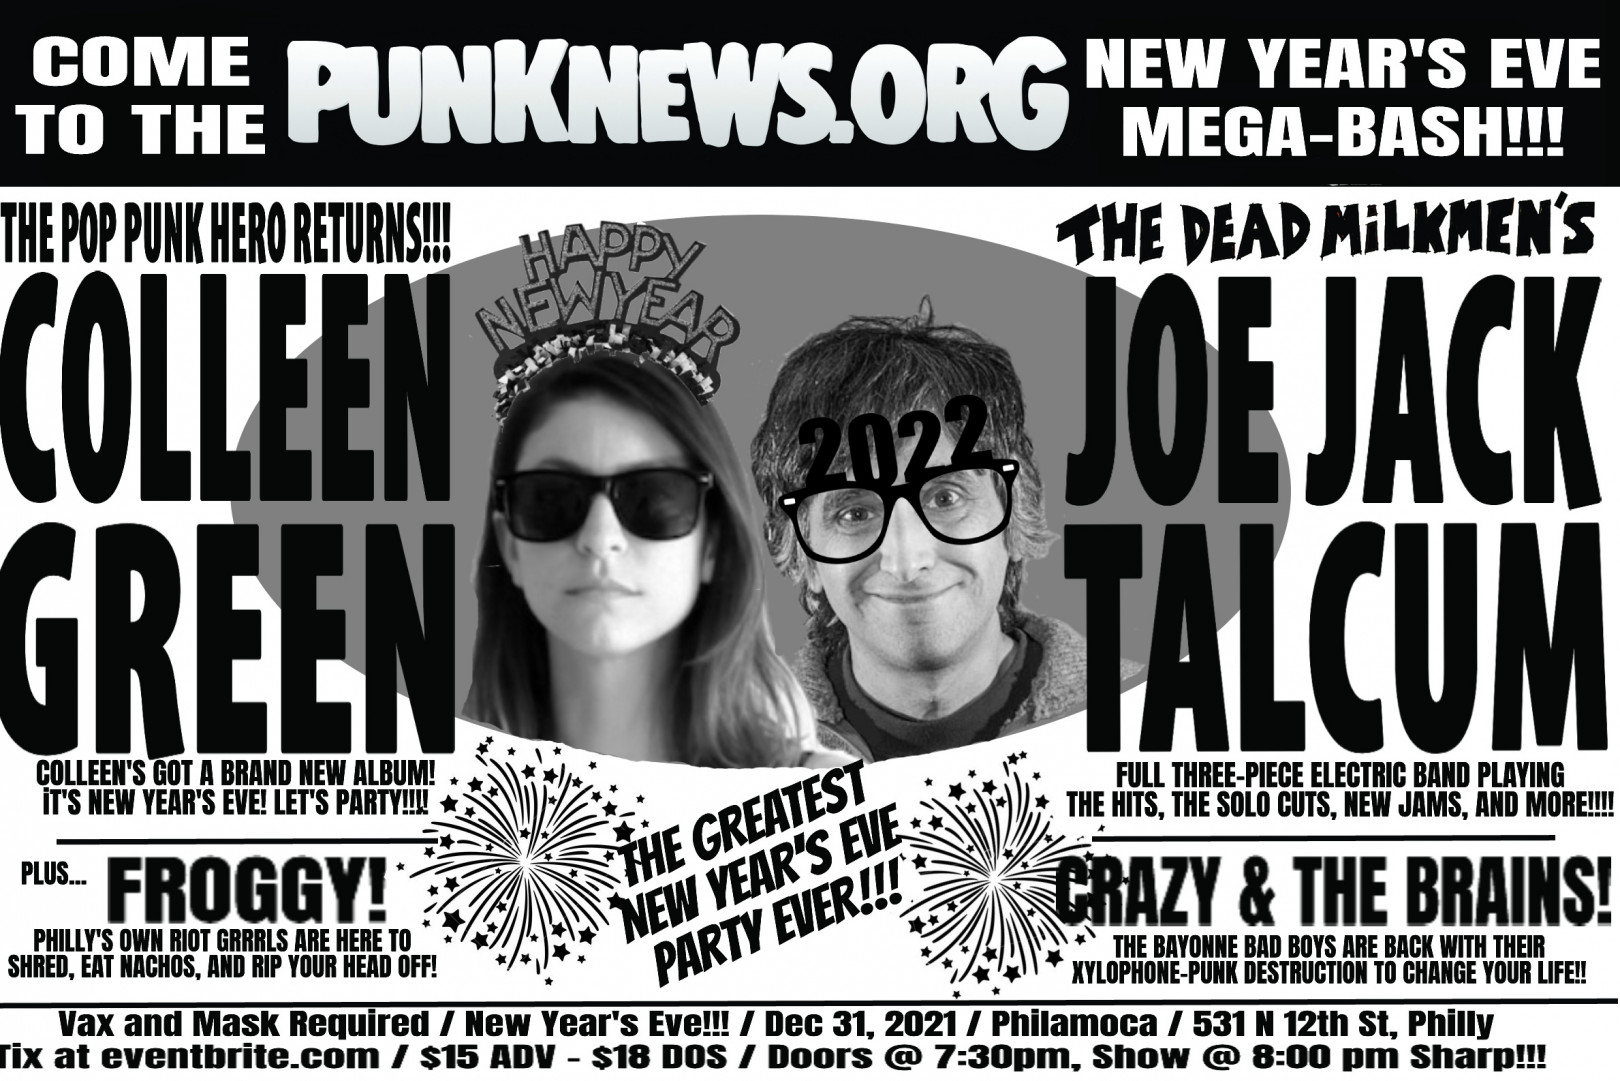 Colleen Green and the Joe Jack Talcum band to co-headline the New Year's Eve Mega-Bash in Philly!!!